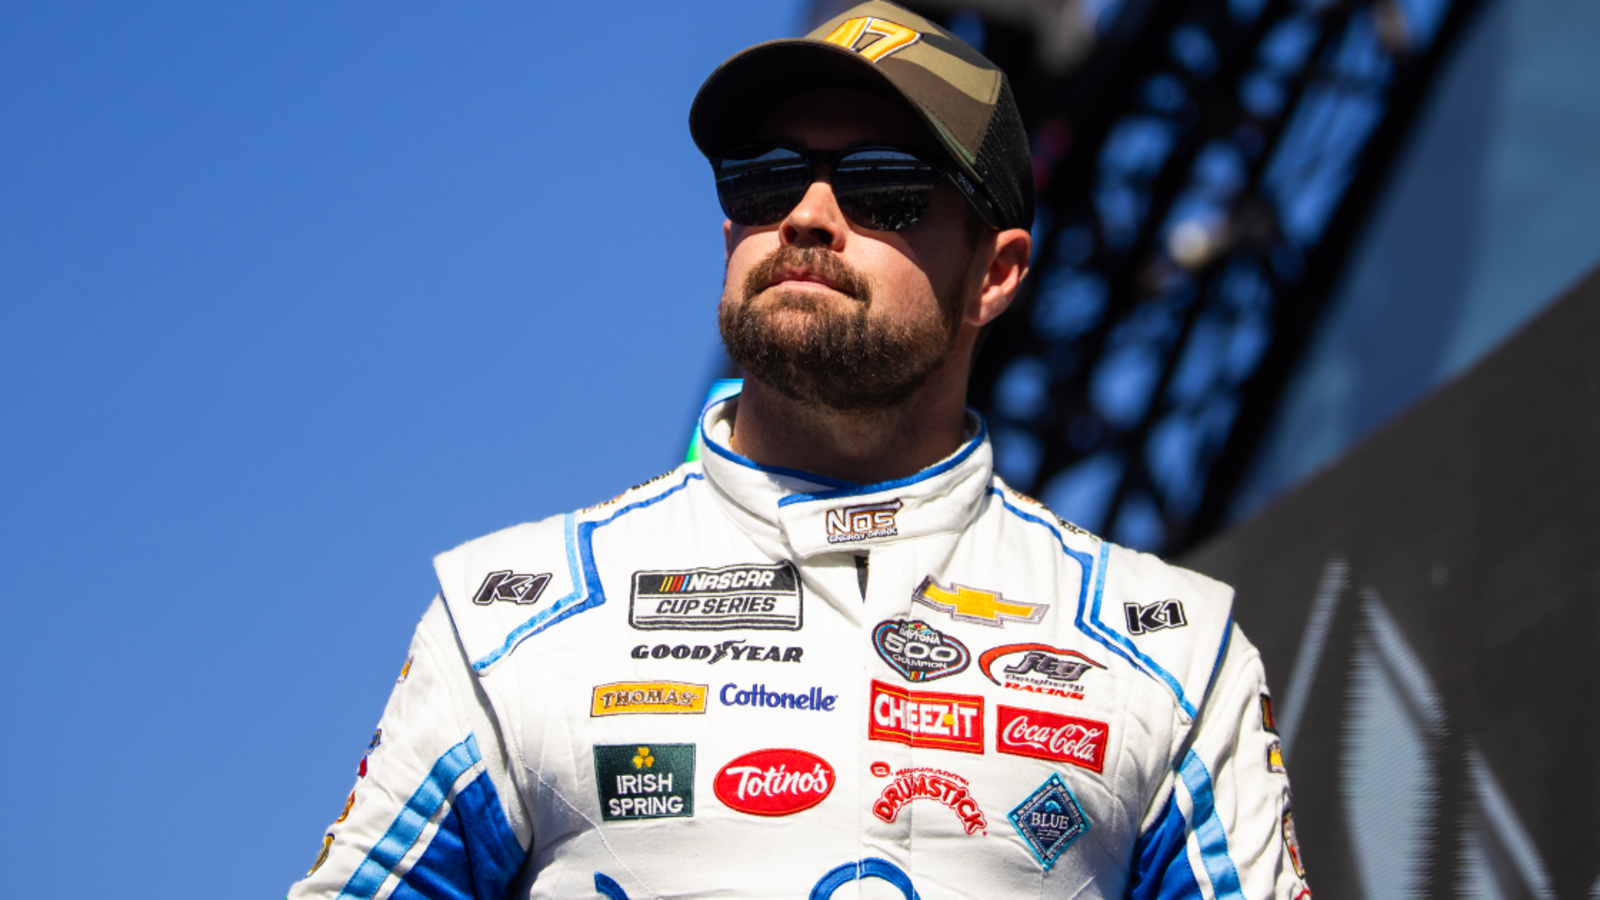 Ricky Stenhouse Jr. wouldn’t have fought Kyle Busch if North Wilkesboro had a tunnel